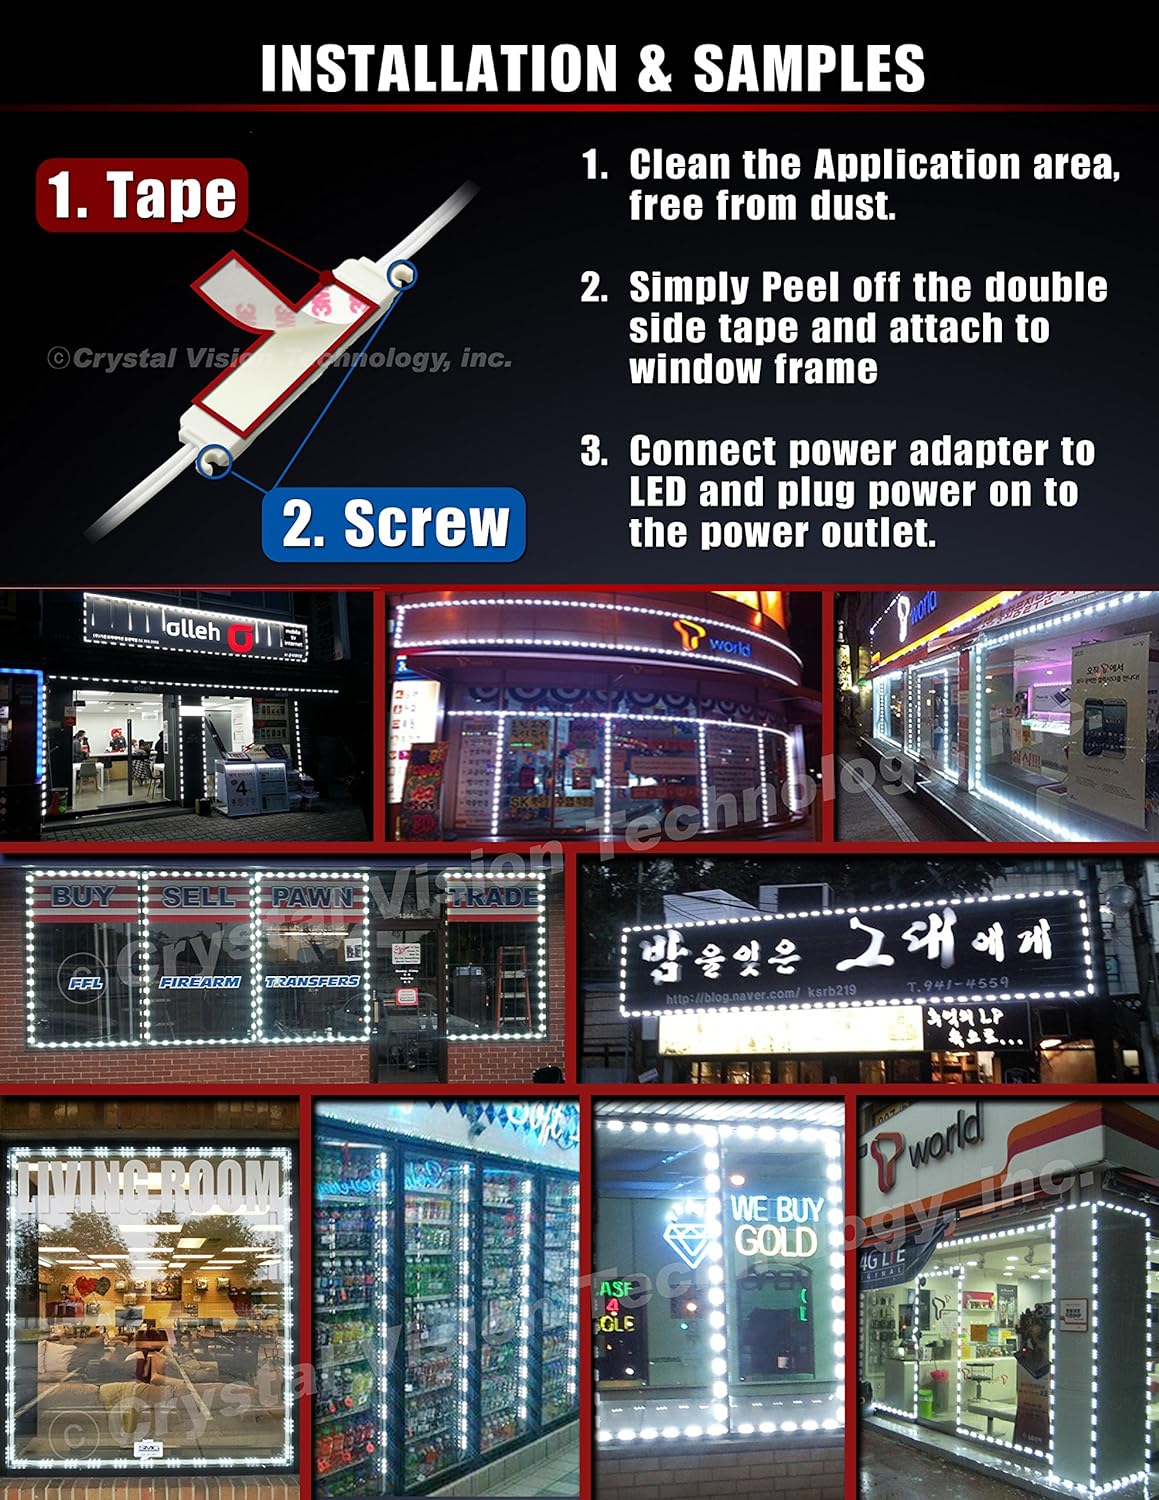 The image is an instructional advertisement from Crystal Vision, detailing the installation process for their LED lighting. It illustrates a two-step installation with options: using tape or screws for mounting. The steps are:  Clean the application area to be free from dust. Peel off the double-sided tape and attach to the window frame. Connect the power adapter to the LED and plug it into the power outlet.